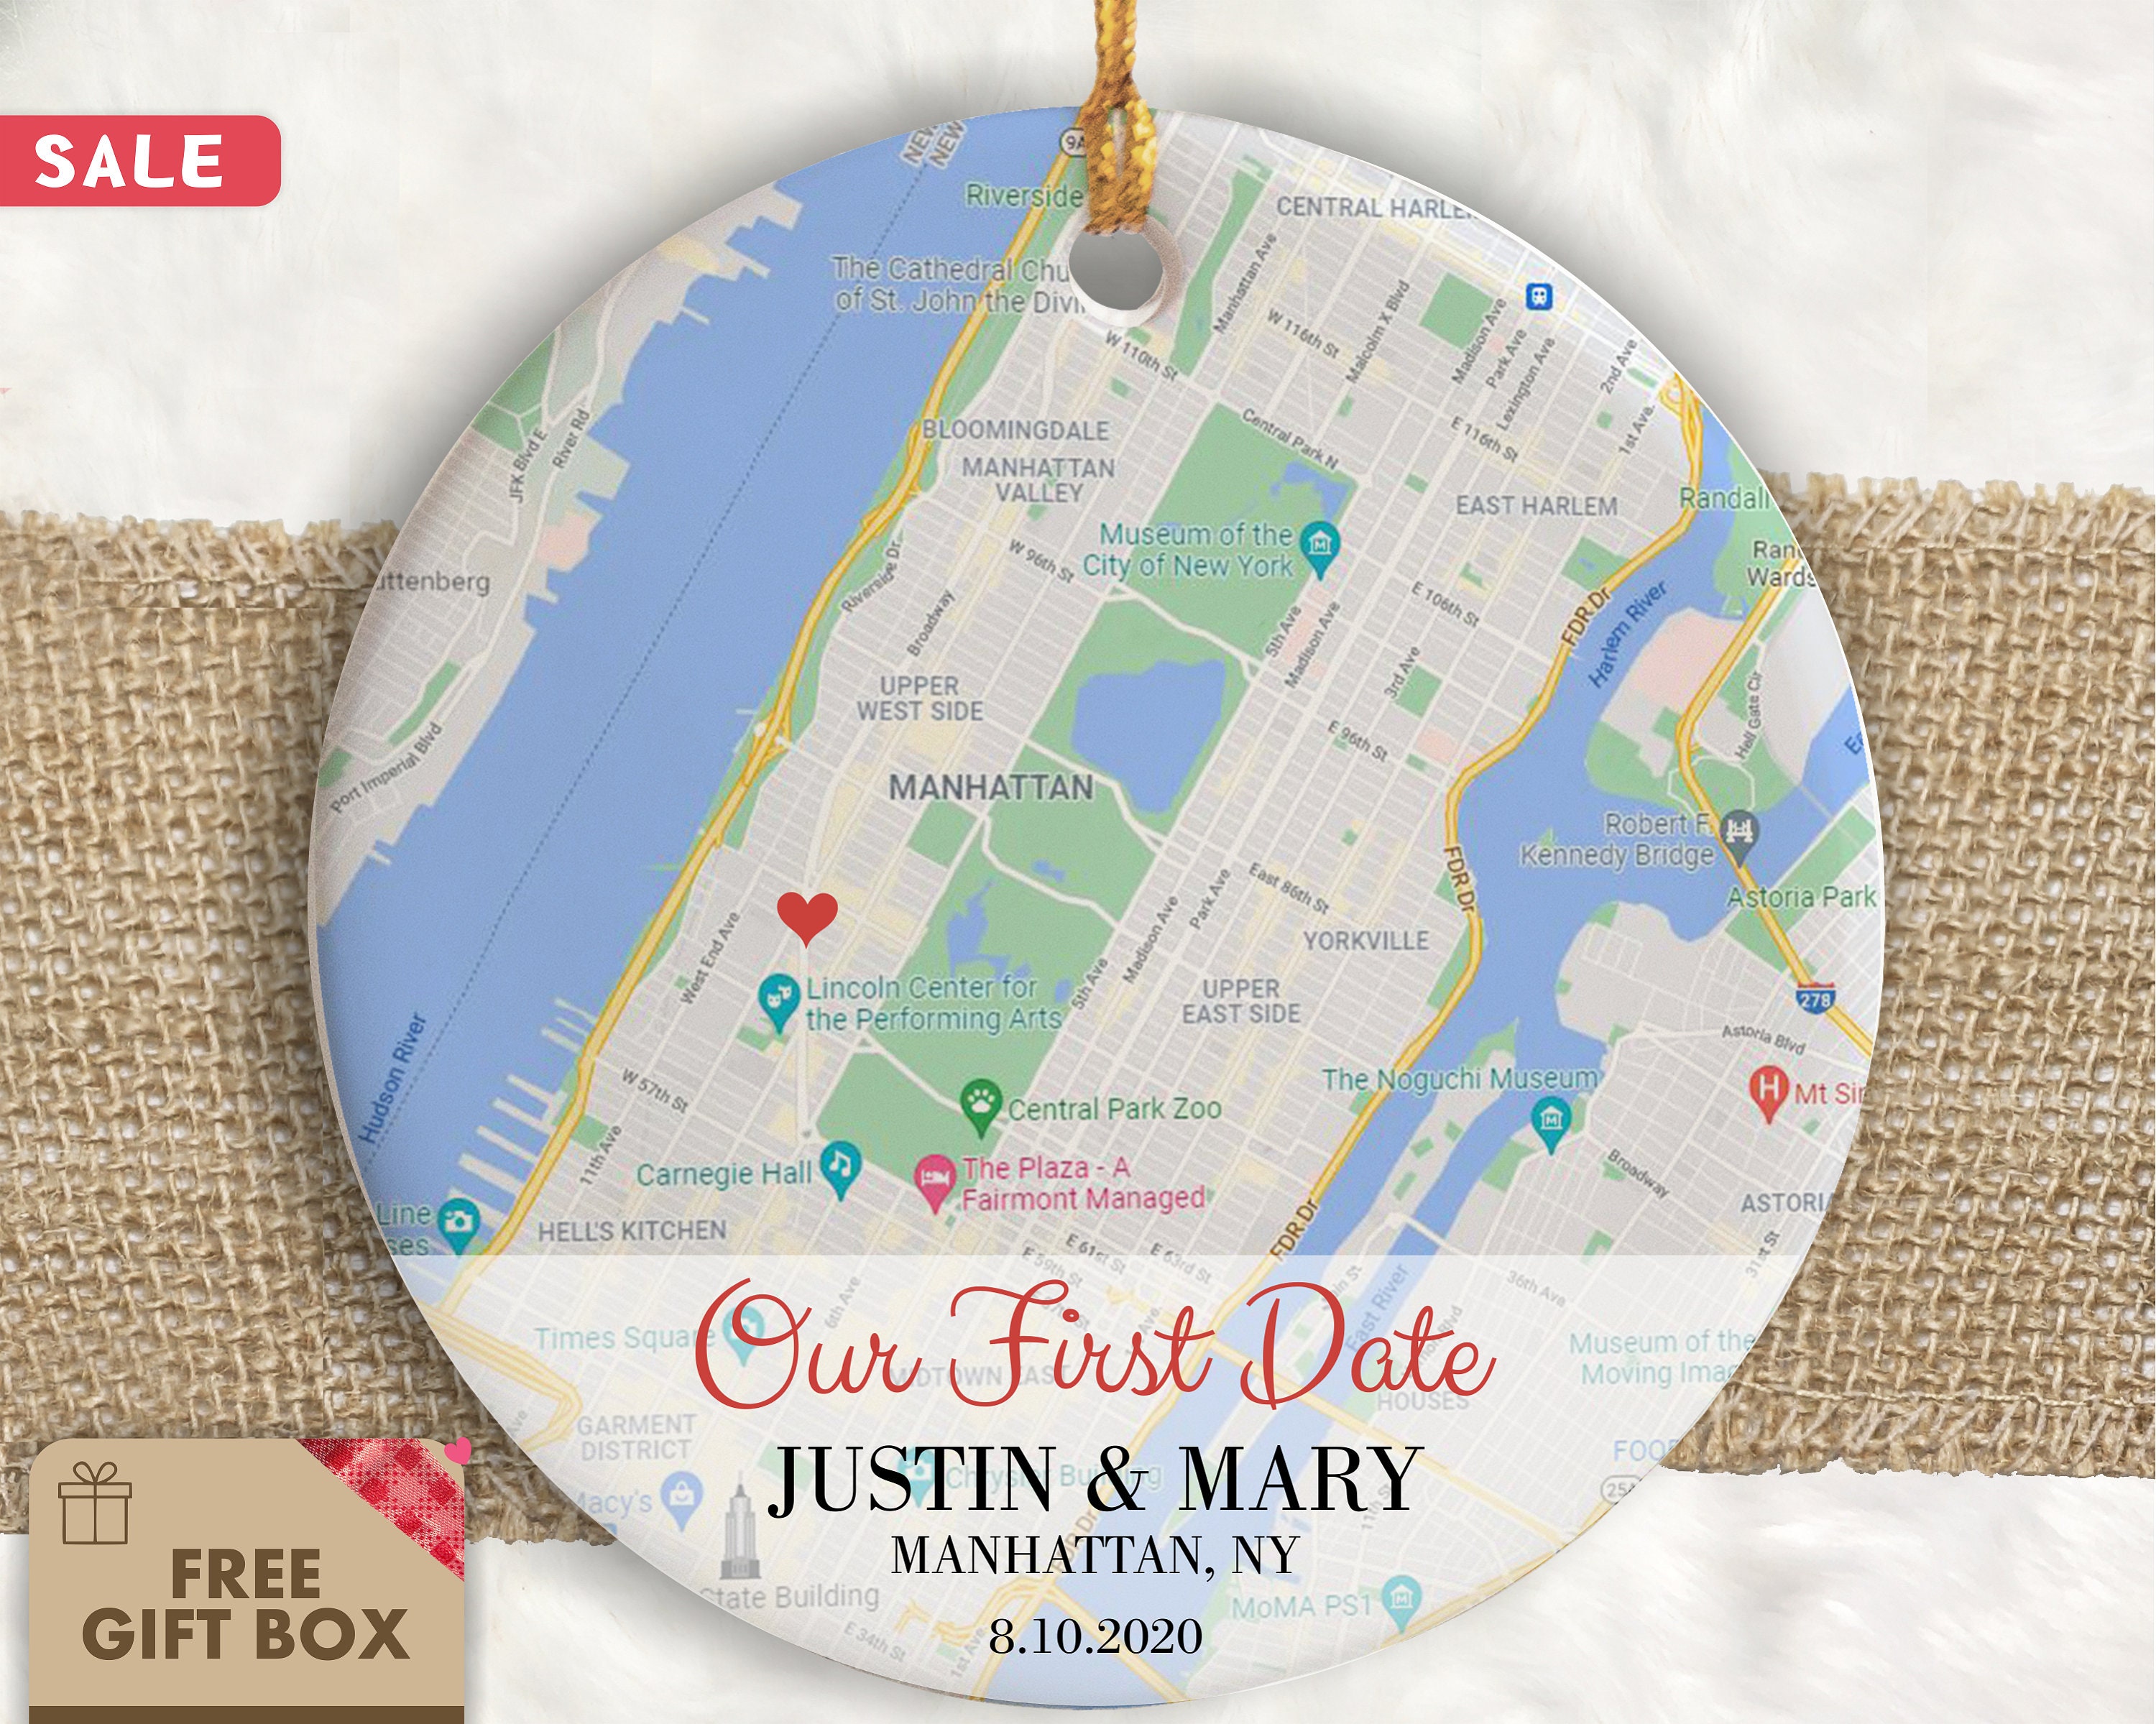 Personalized Our First Date Map, Acrylic Plaque Where We Met